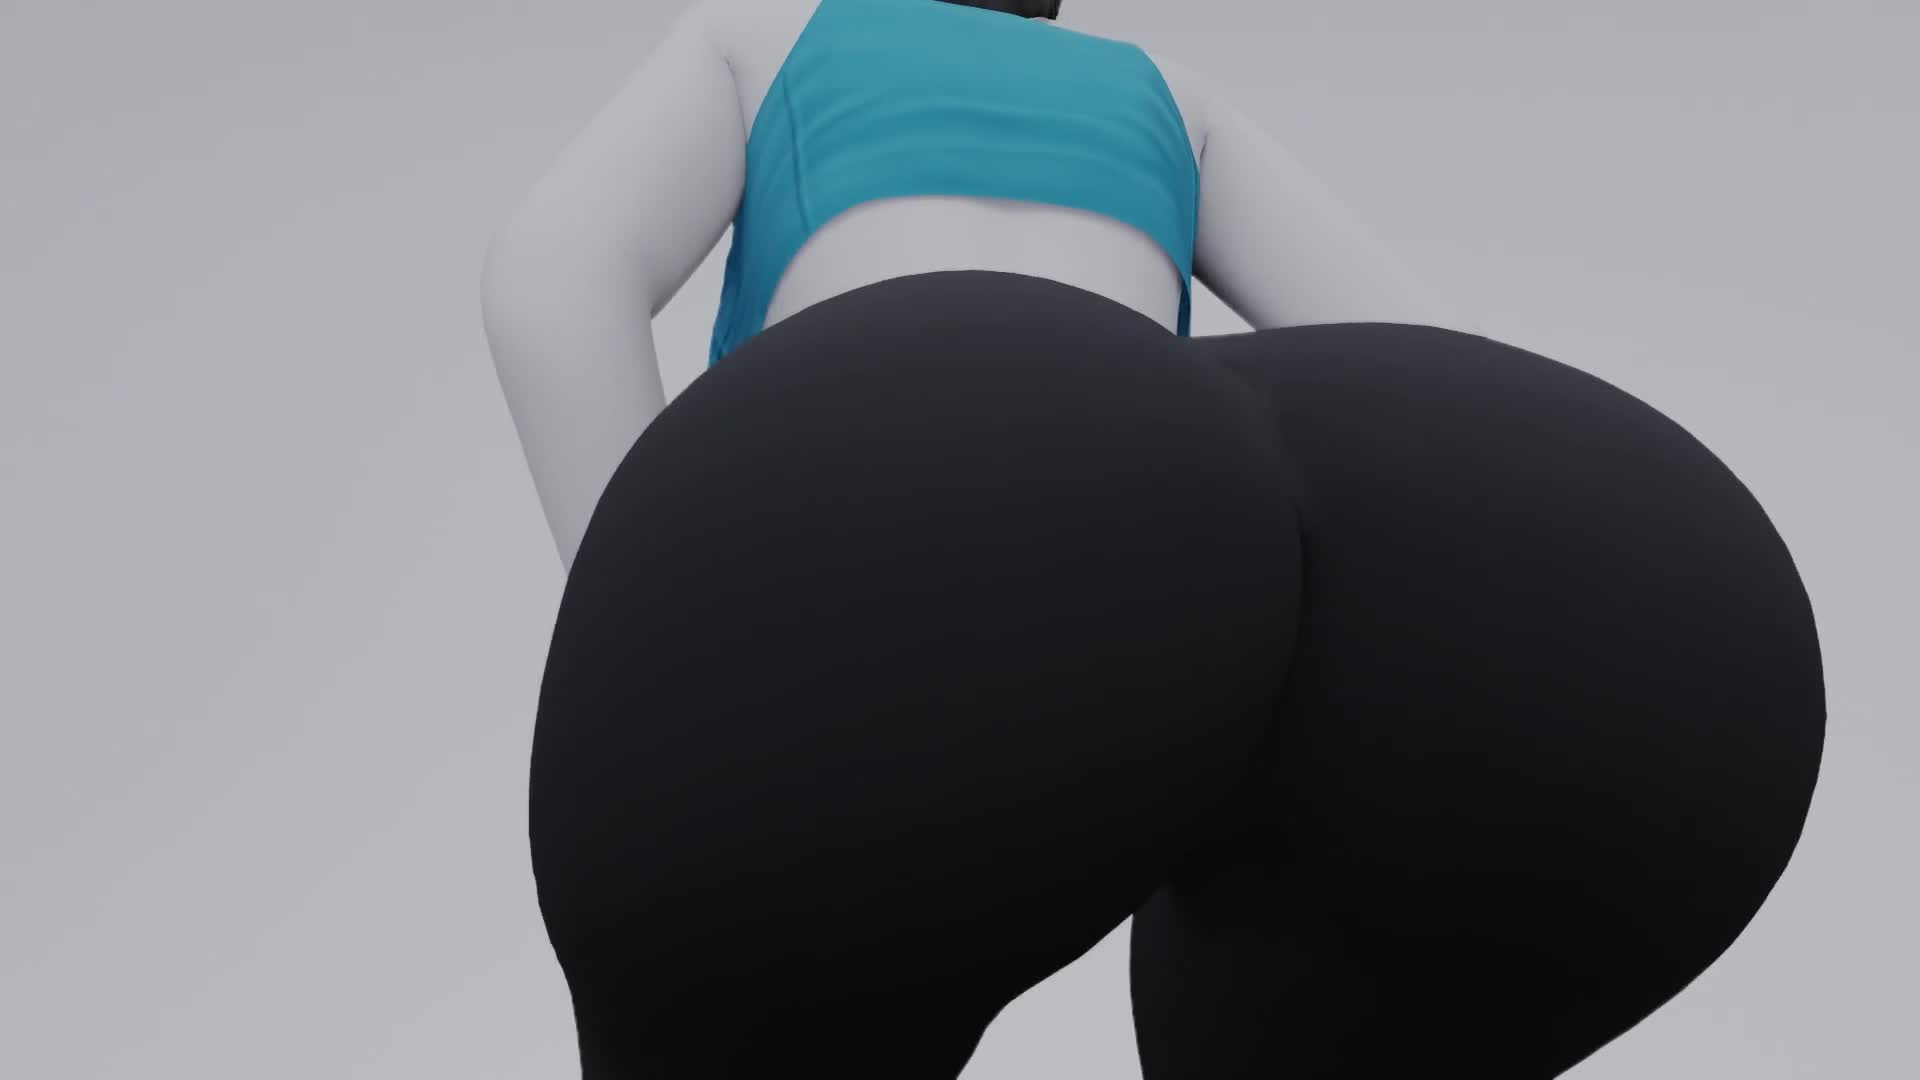 Wii Fit Wii Fit Trainer Big Ass Video